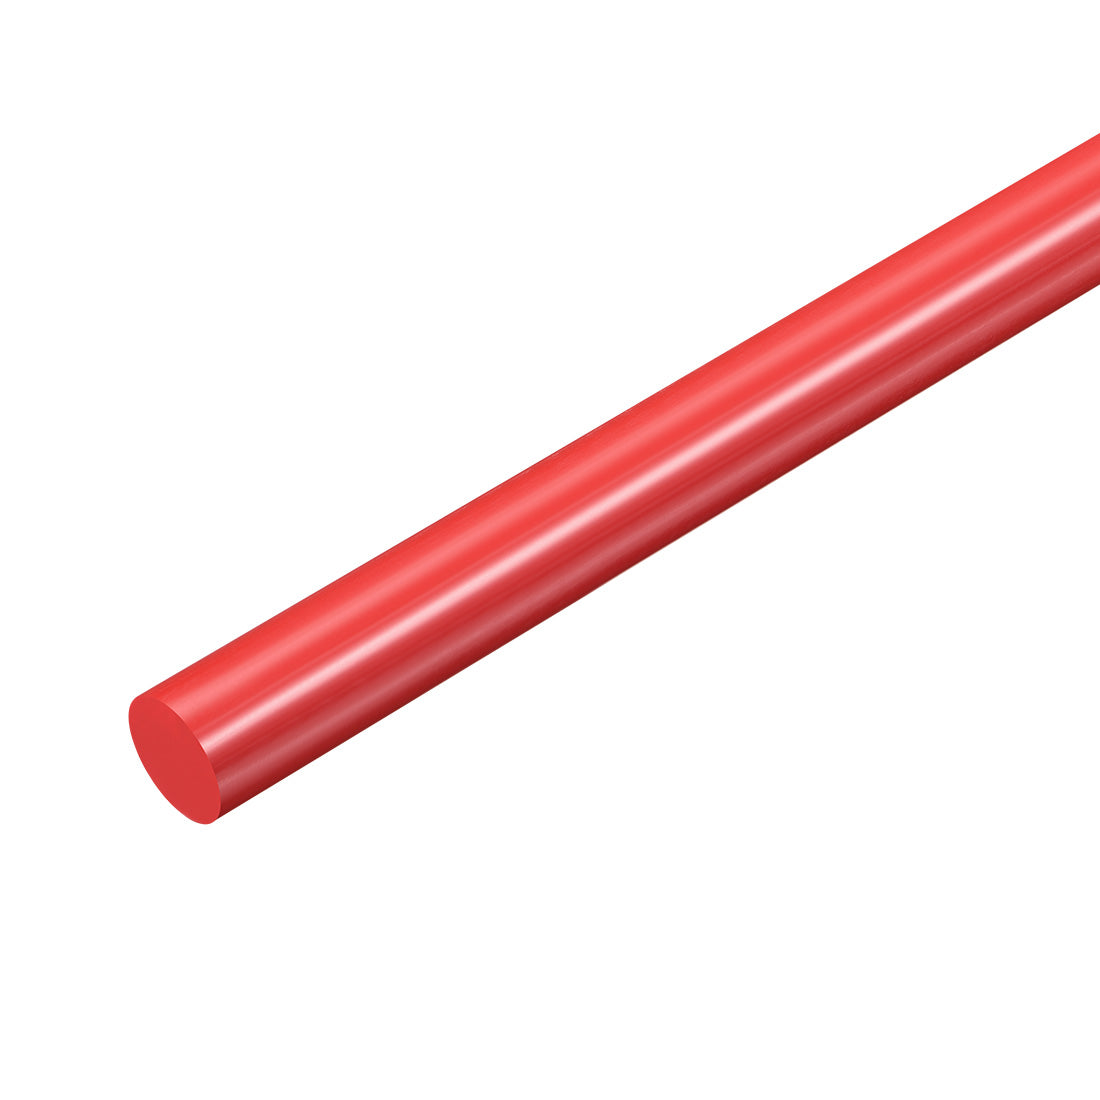 uxcell Uxcell Plastic Round Rod,10mm Dia 50cm Red Engineering Plastic Round Bar